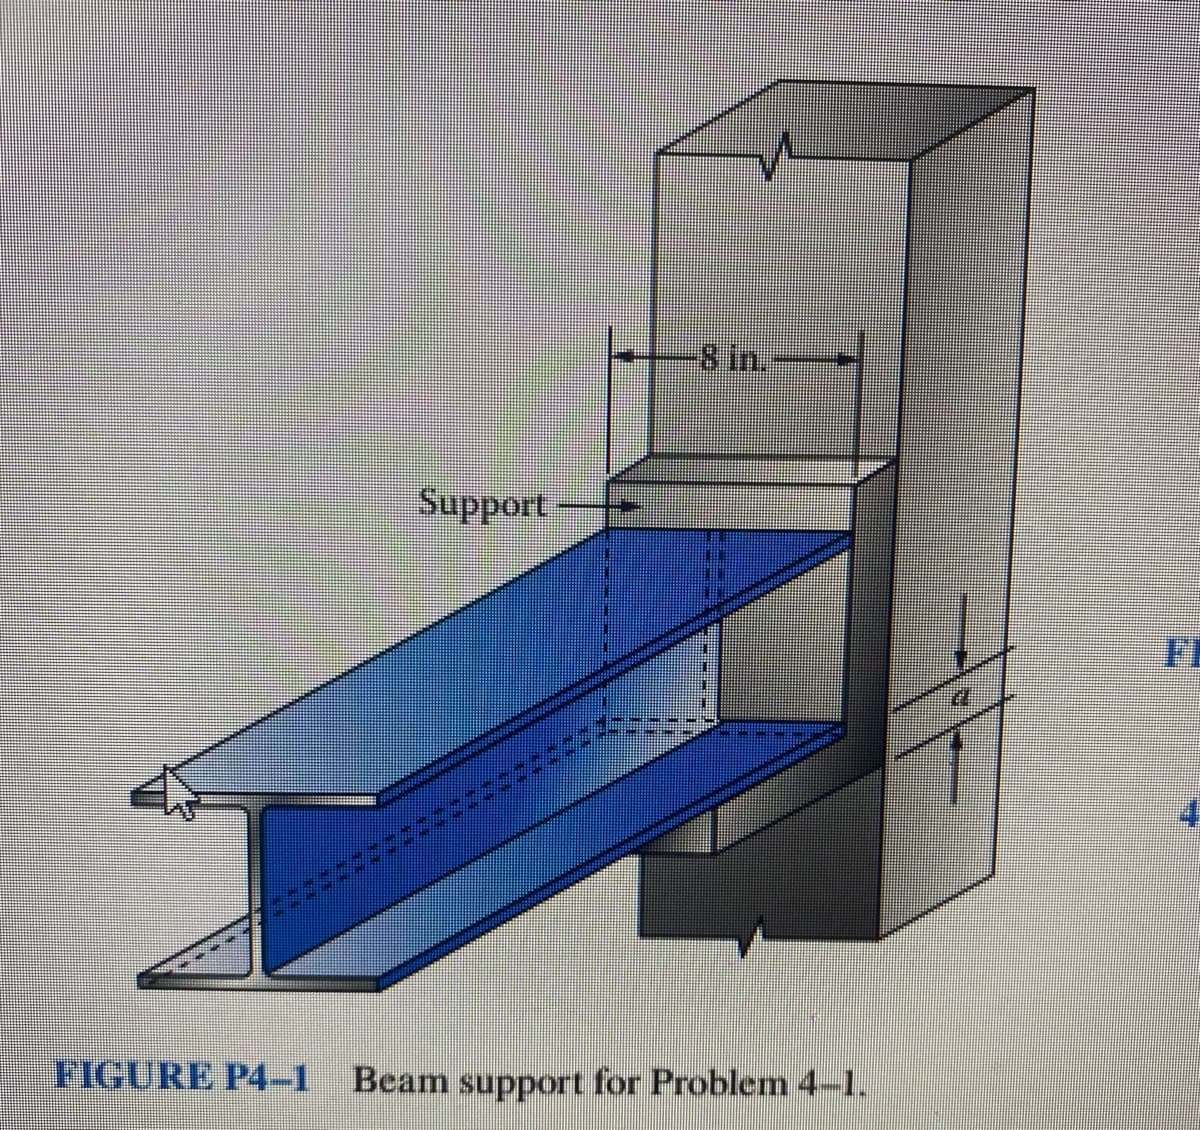 -8 in.-
Support
FI
FIGURE P4-1
Beam support for Problem 4-1.
